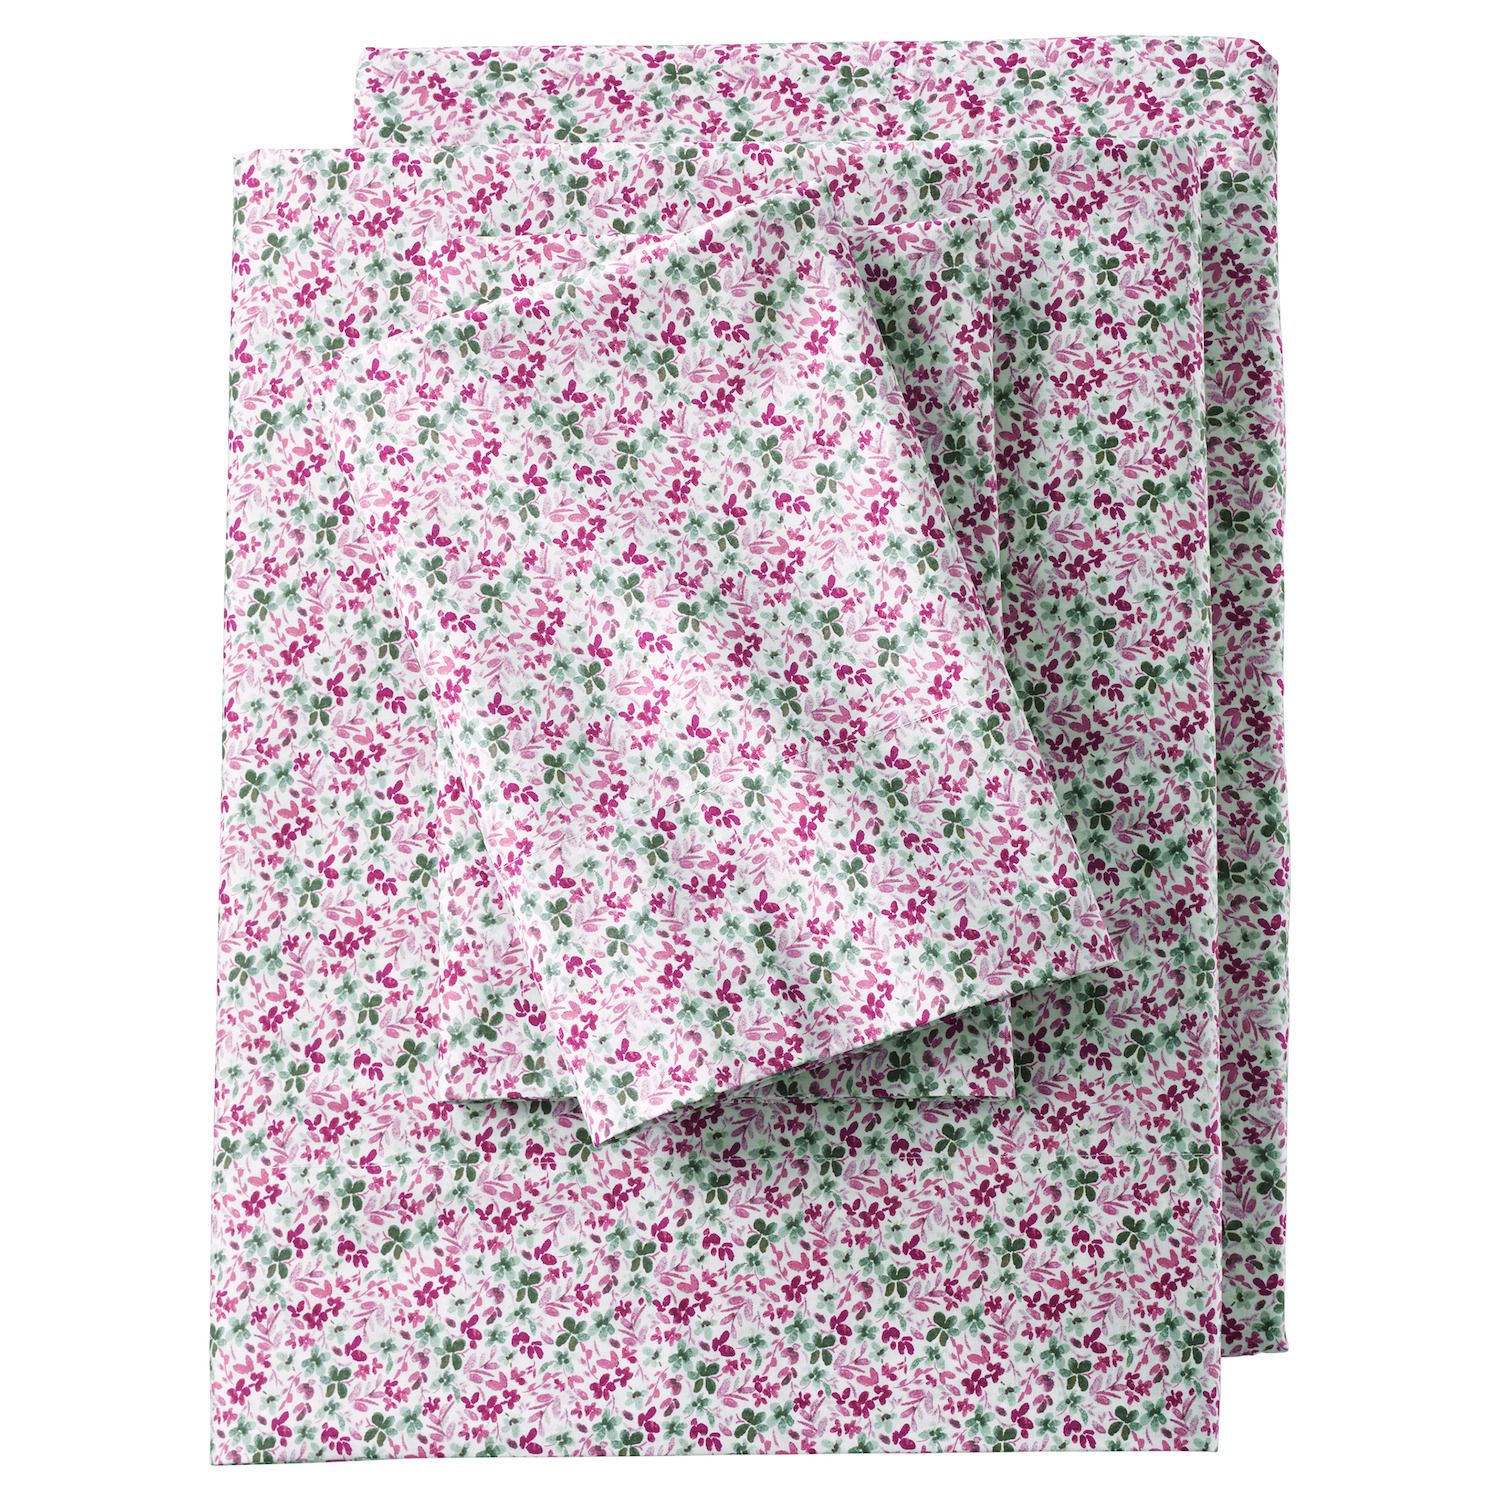 Image for Lands' End 200 Thread Count Percale Print Sheet Set or Pillowcases at Kohl's.